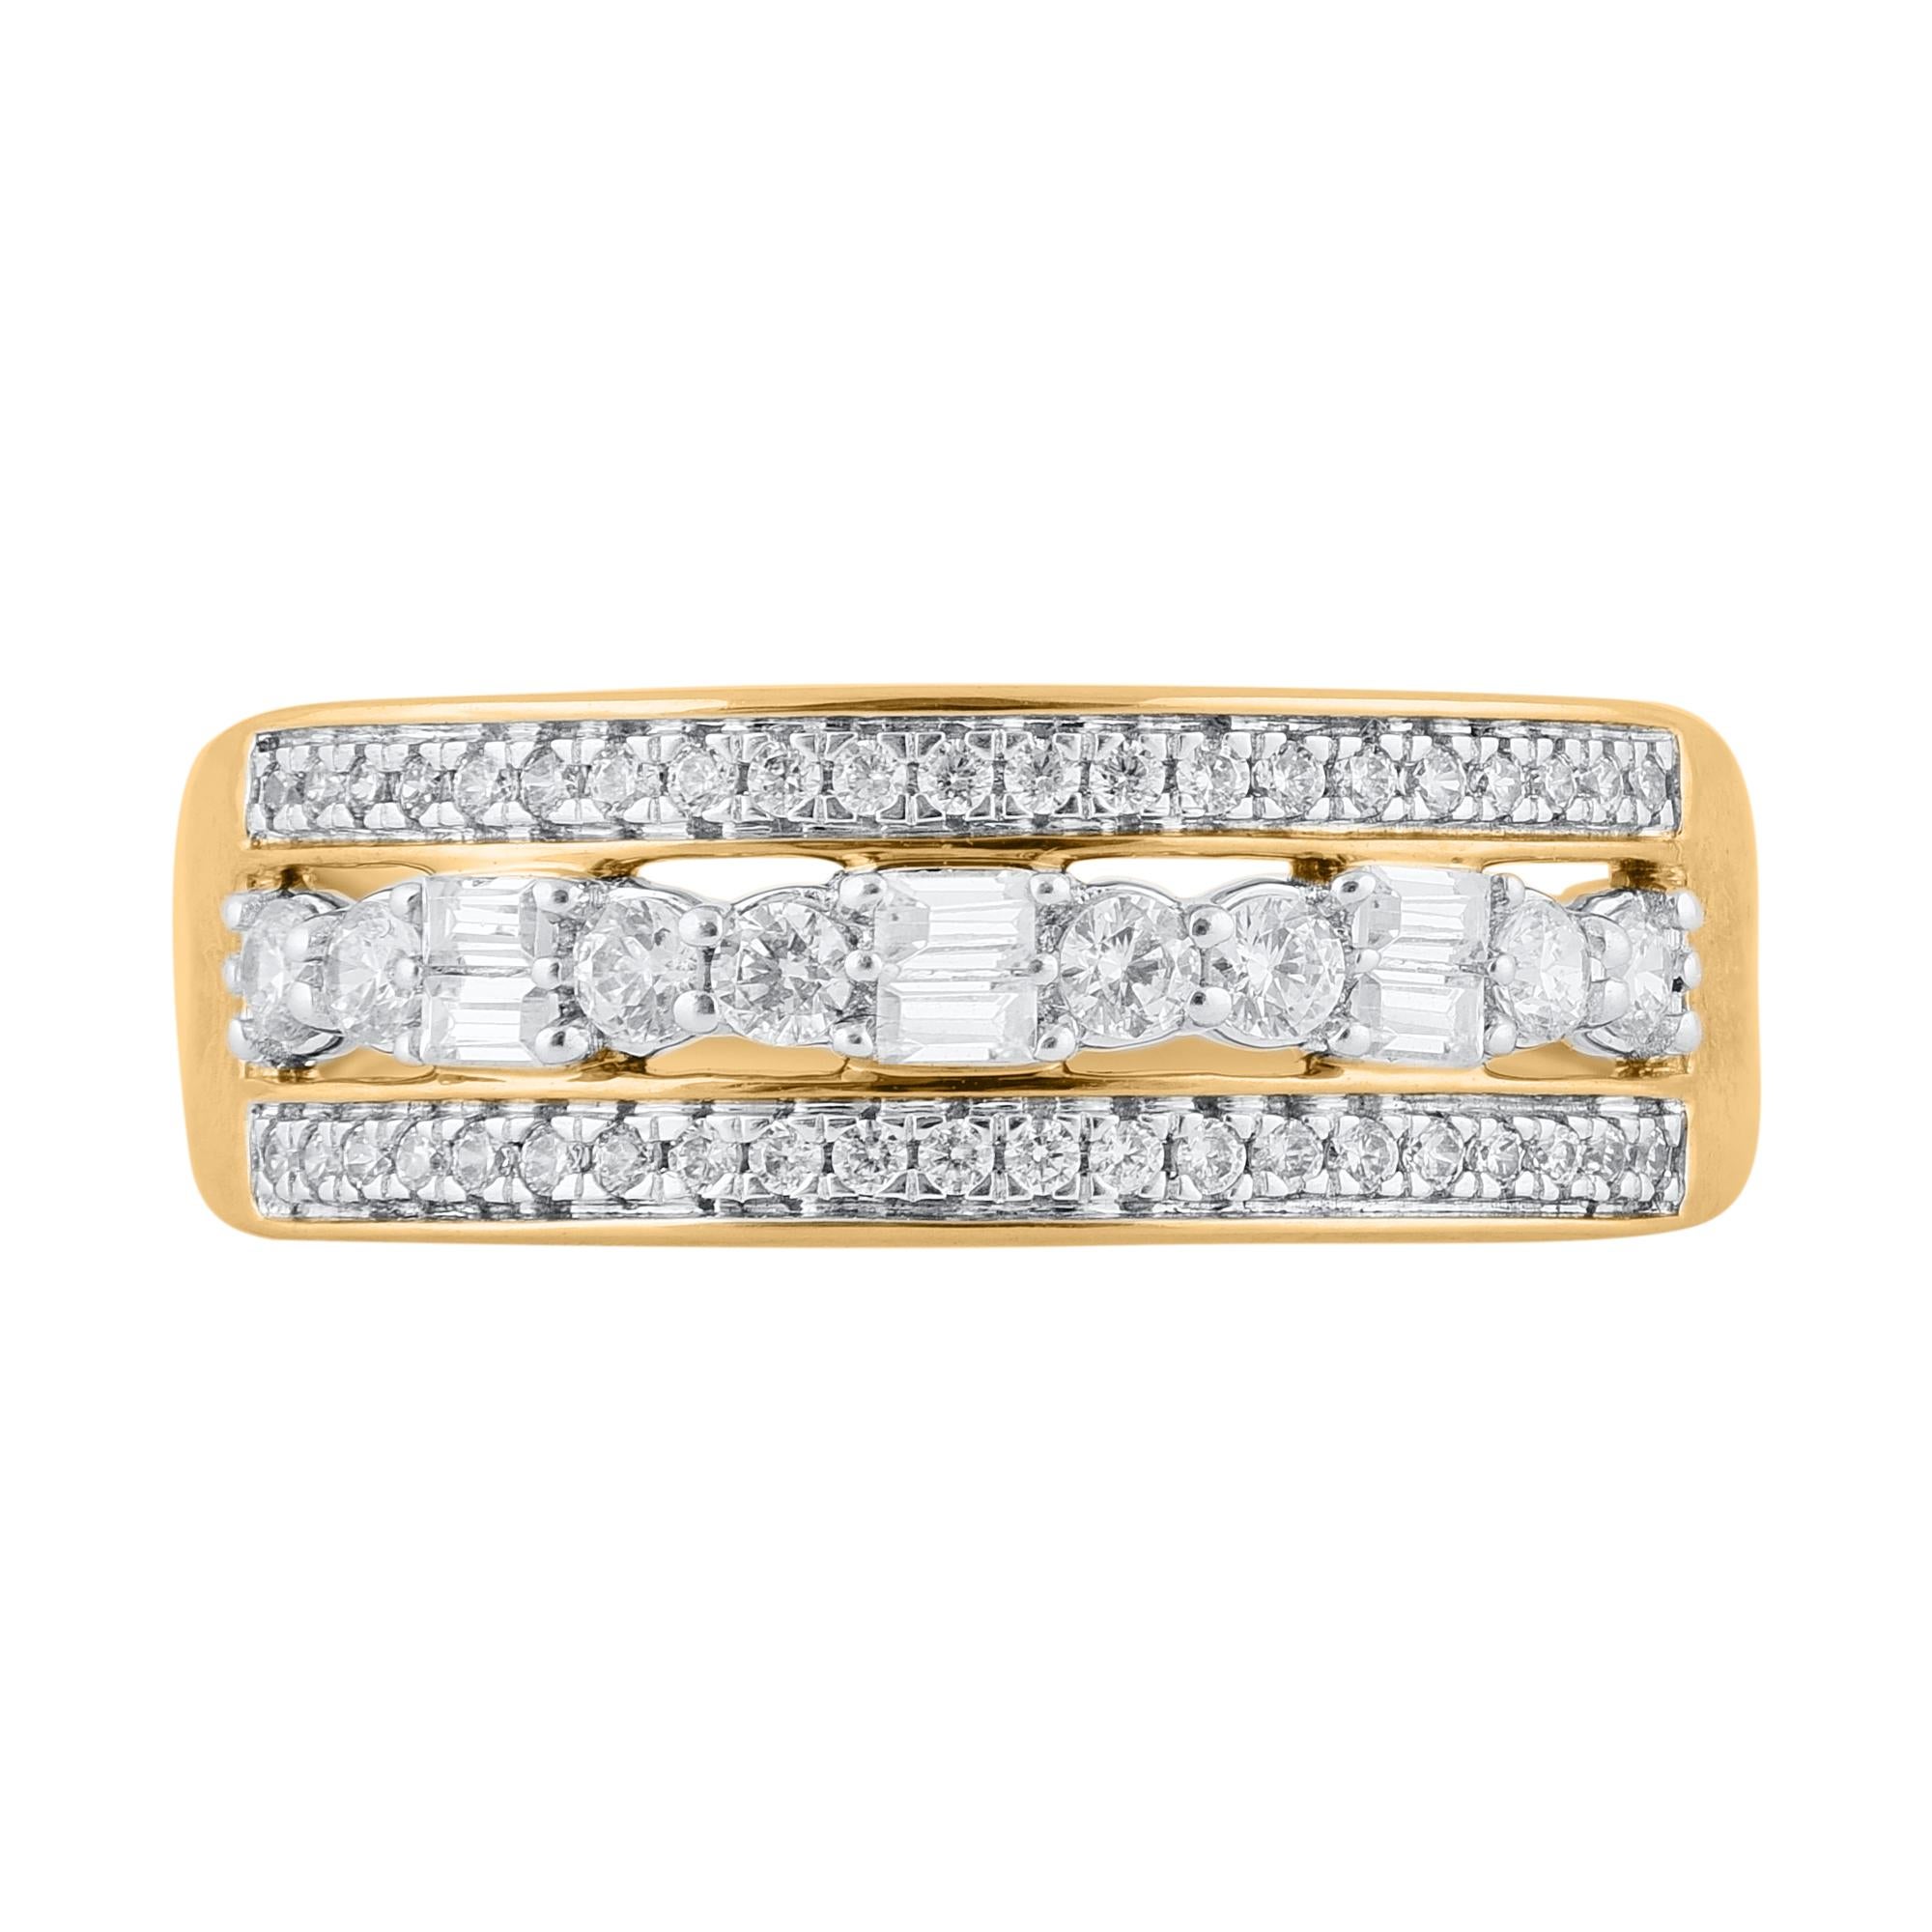 Contemporary TJD 0.50 Carat Round & Baguette Diamond 14KT Yellow Gold Wedding Band Ring For Sale